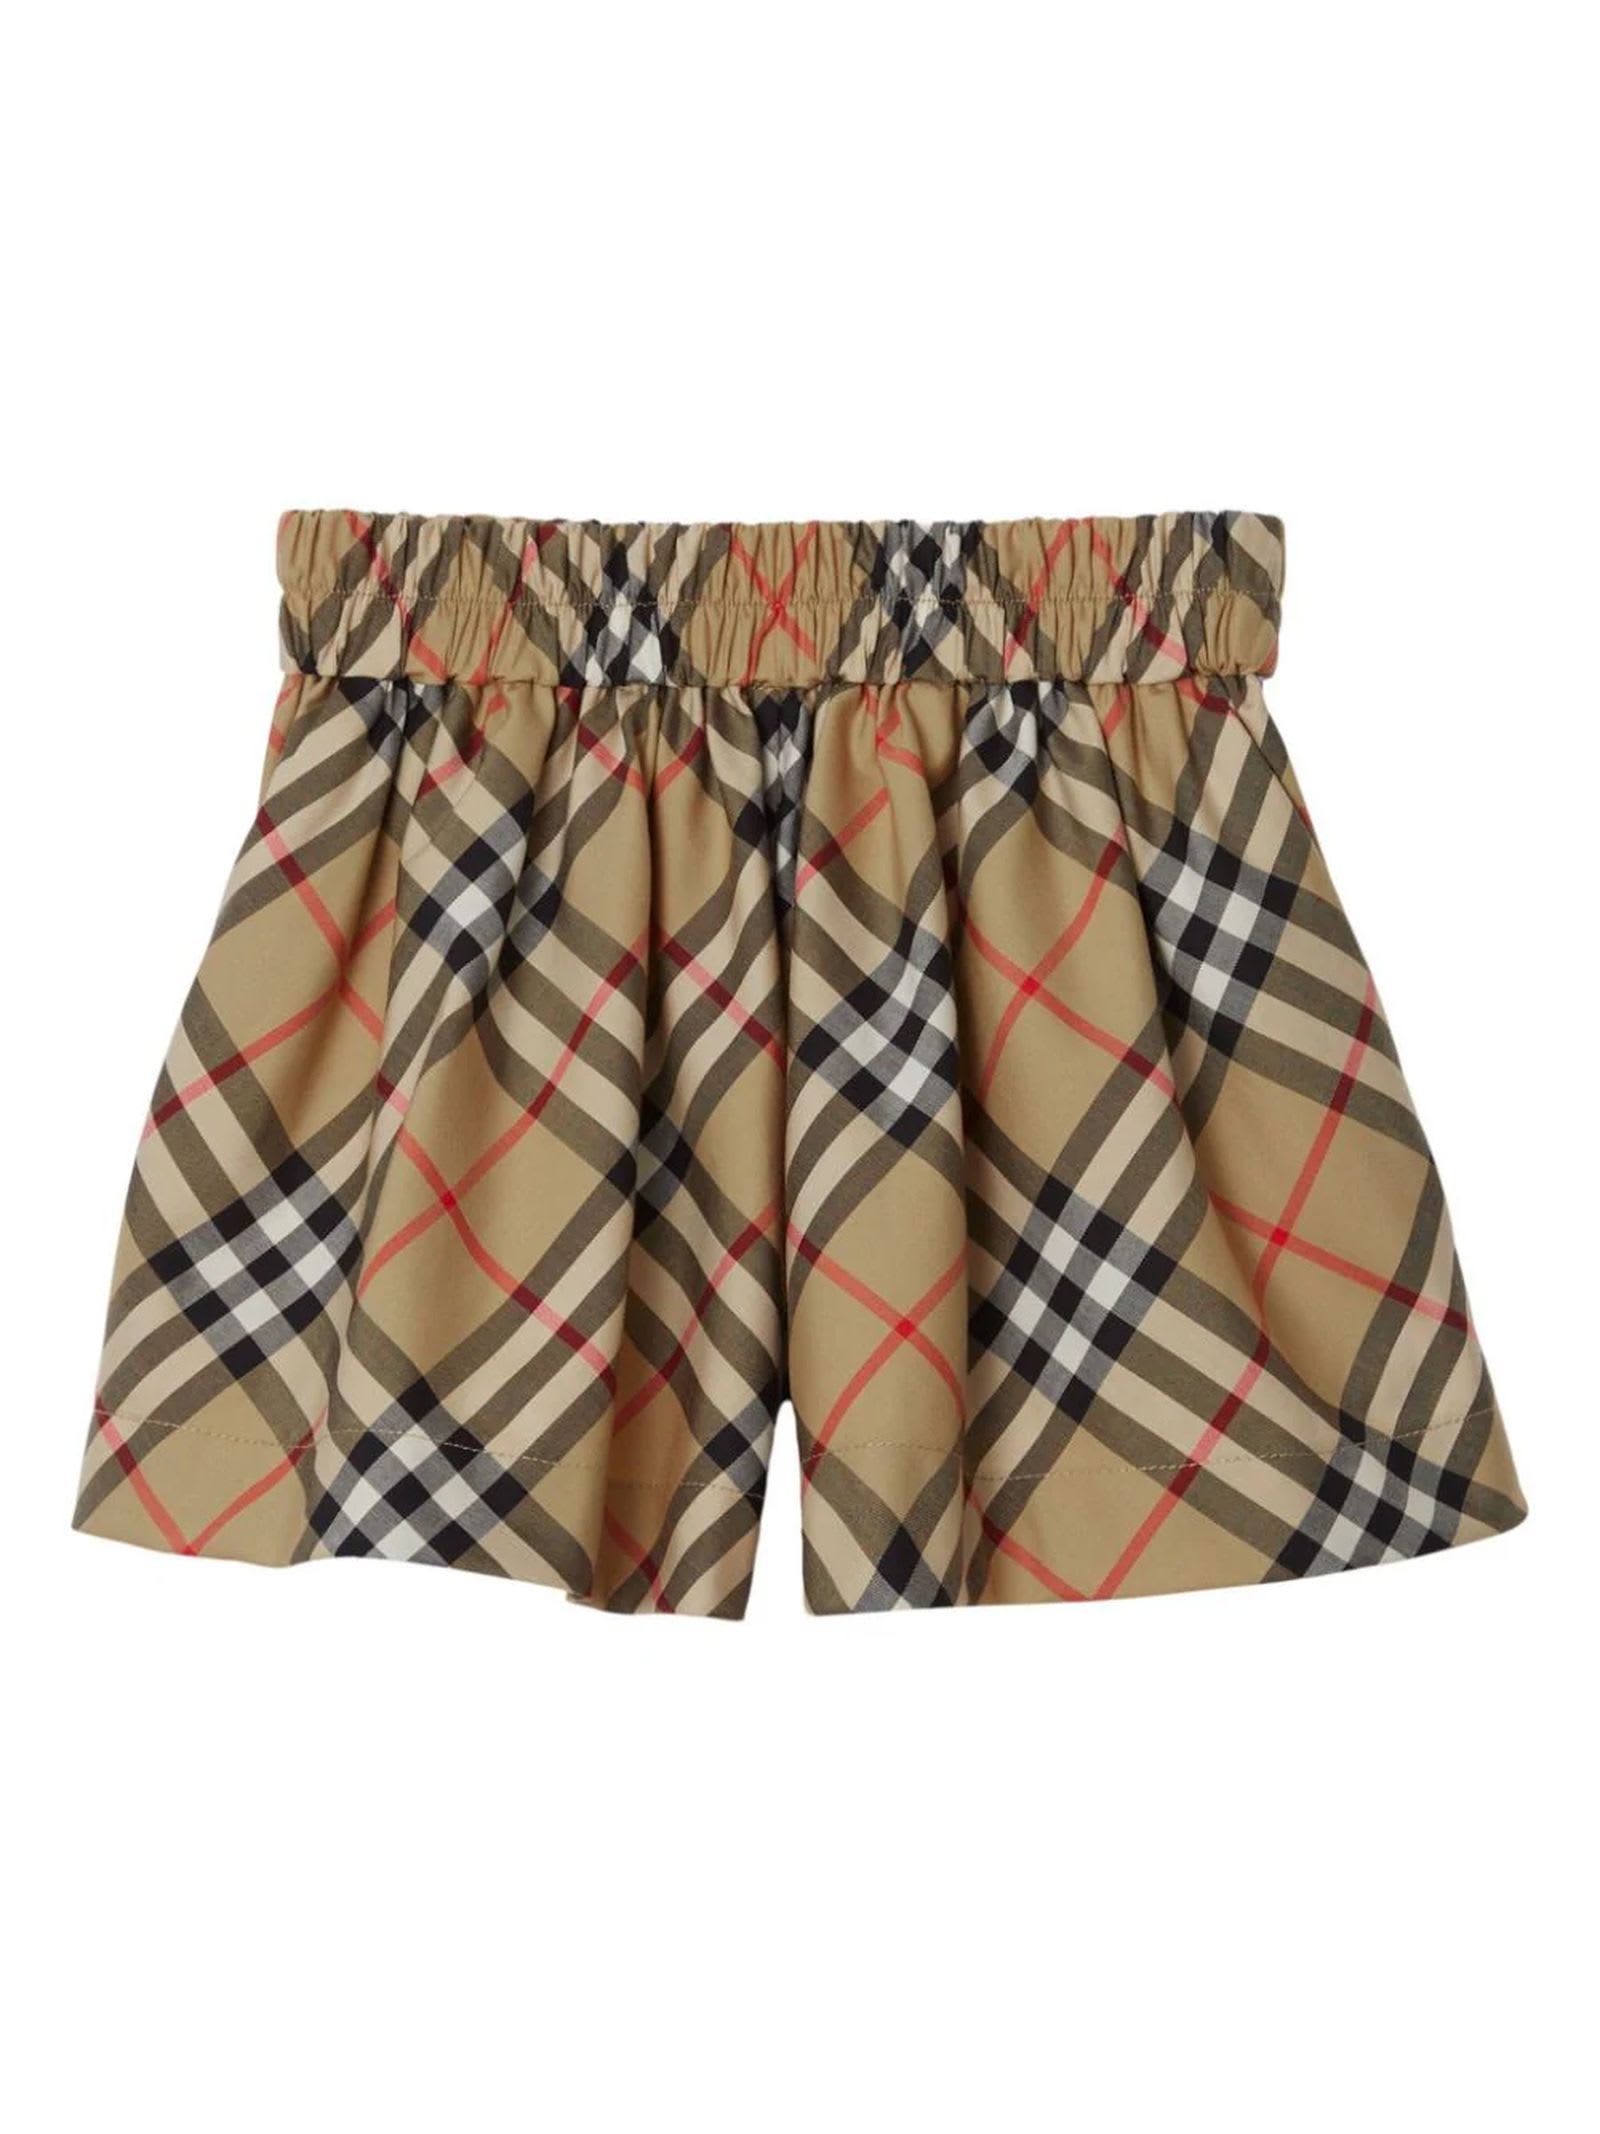 BURBERRY VINTAGE CHECK JERSEY SHORTS